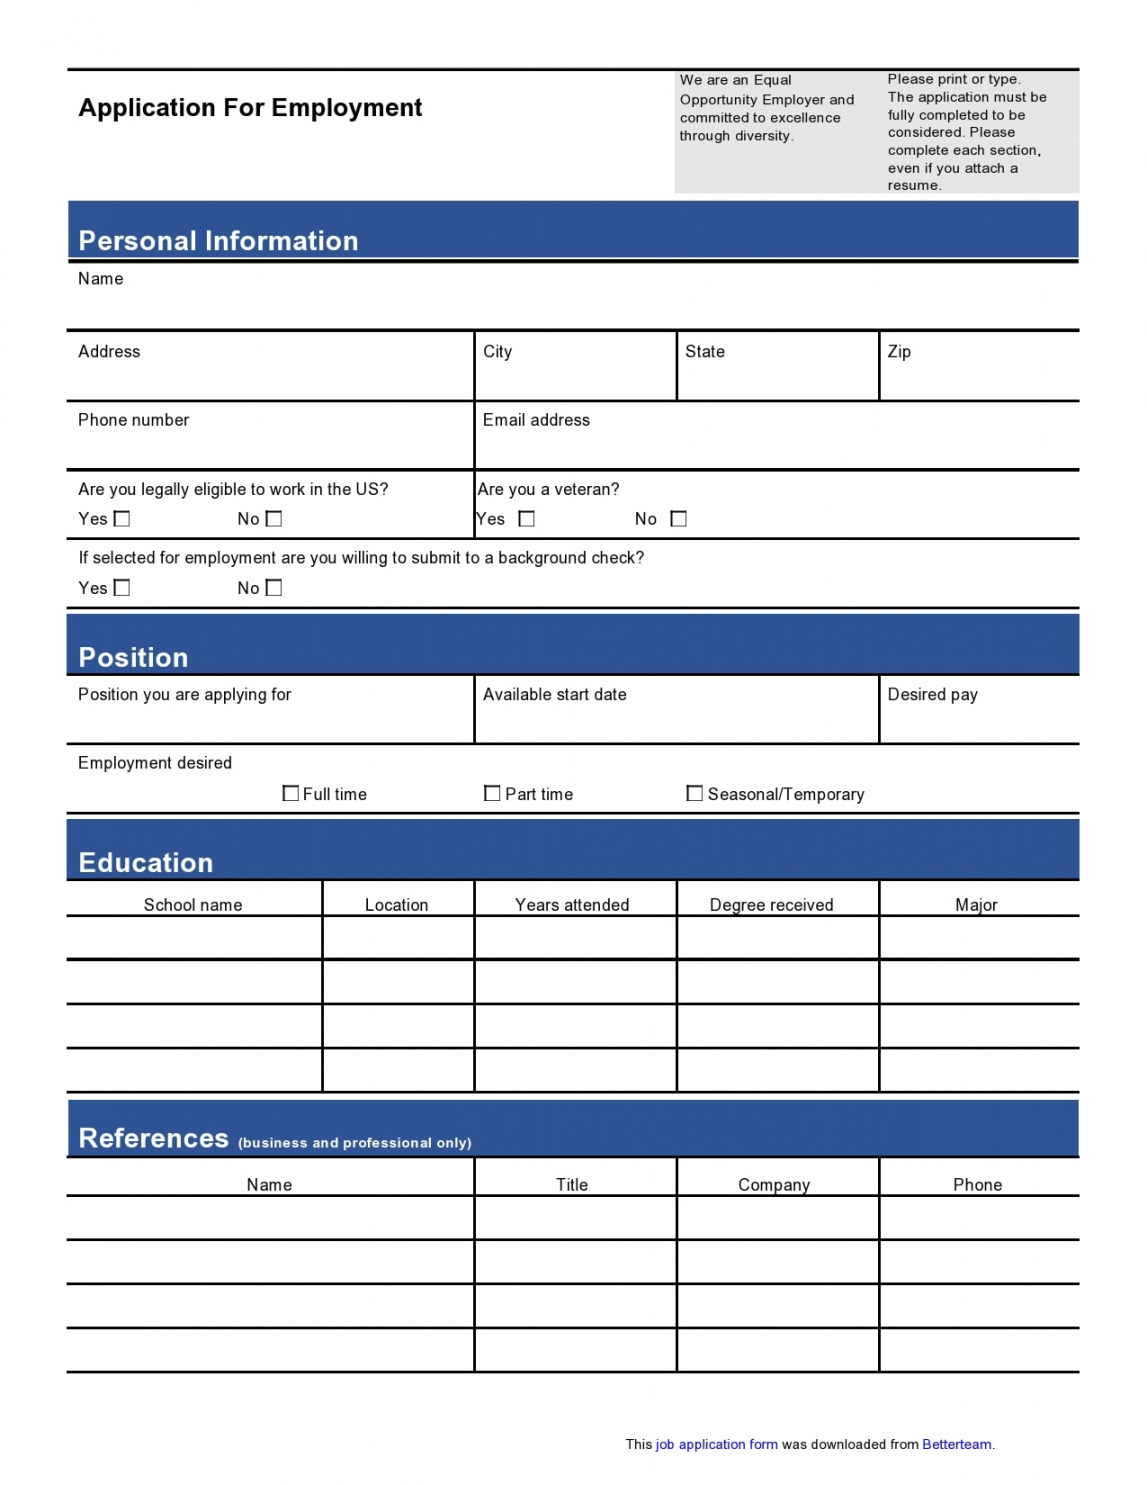 Application For Employment Form Free Printable - Printable -  Basic Employment Application Templates [Free]